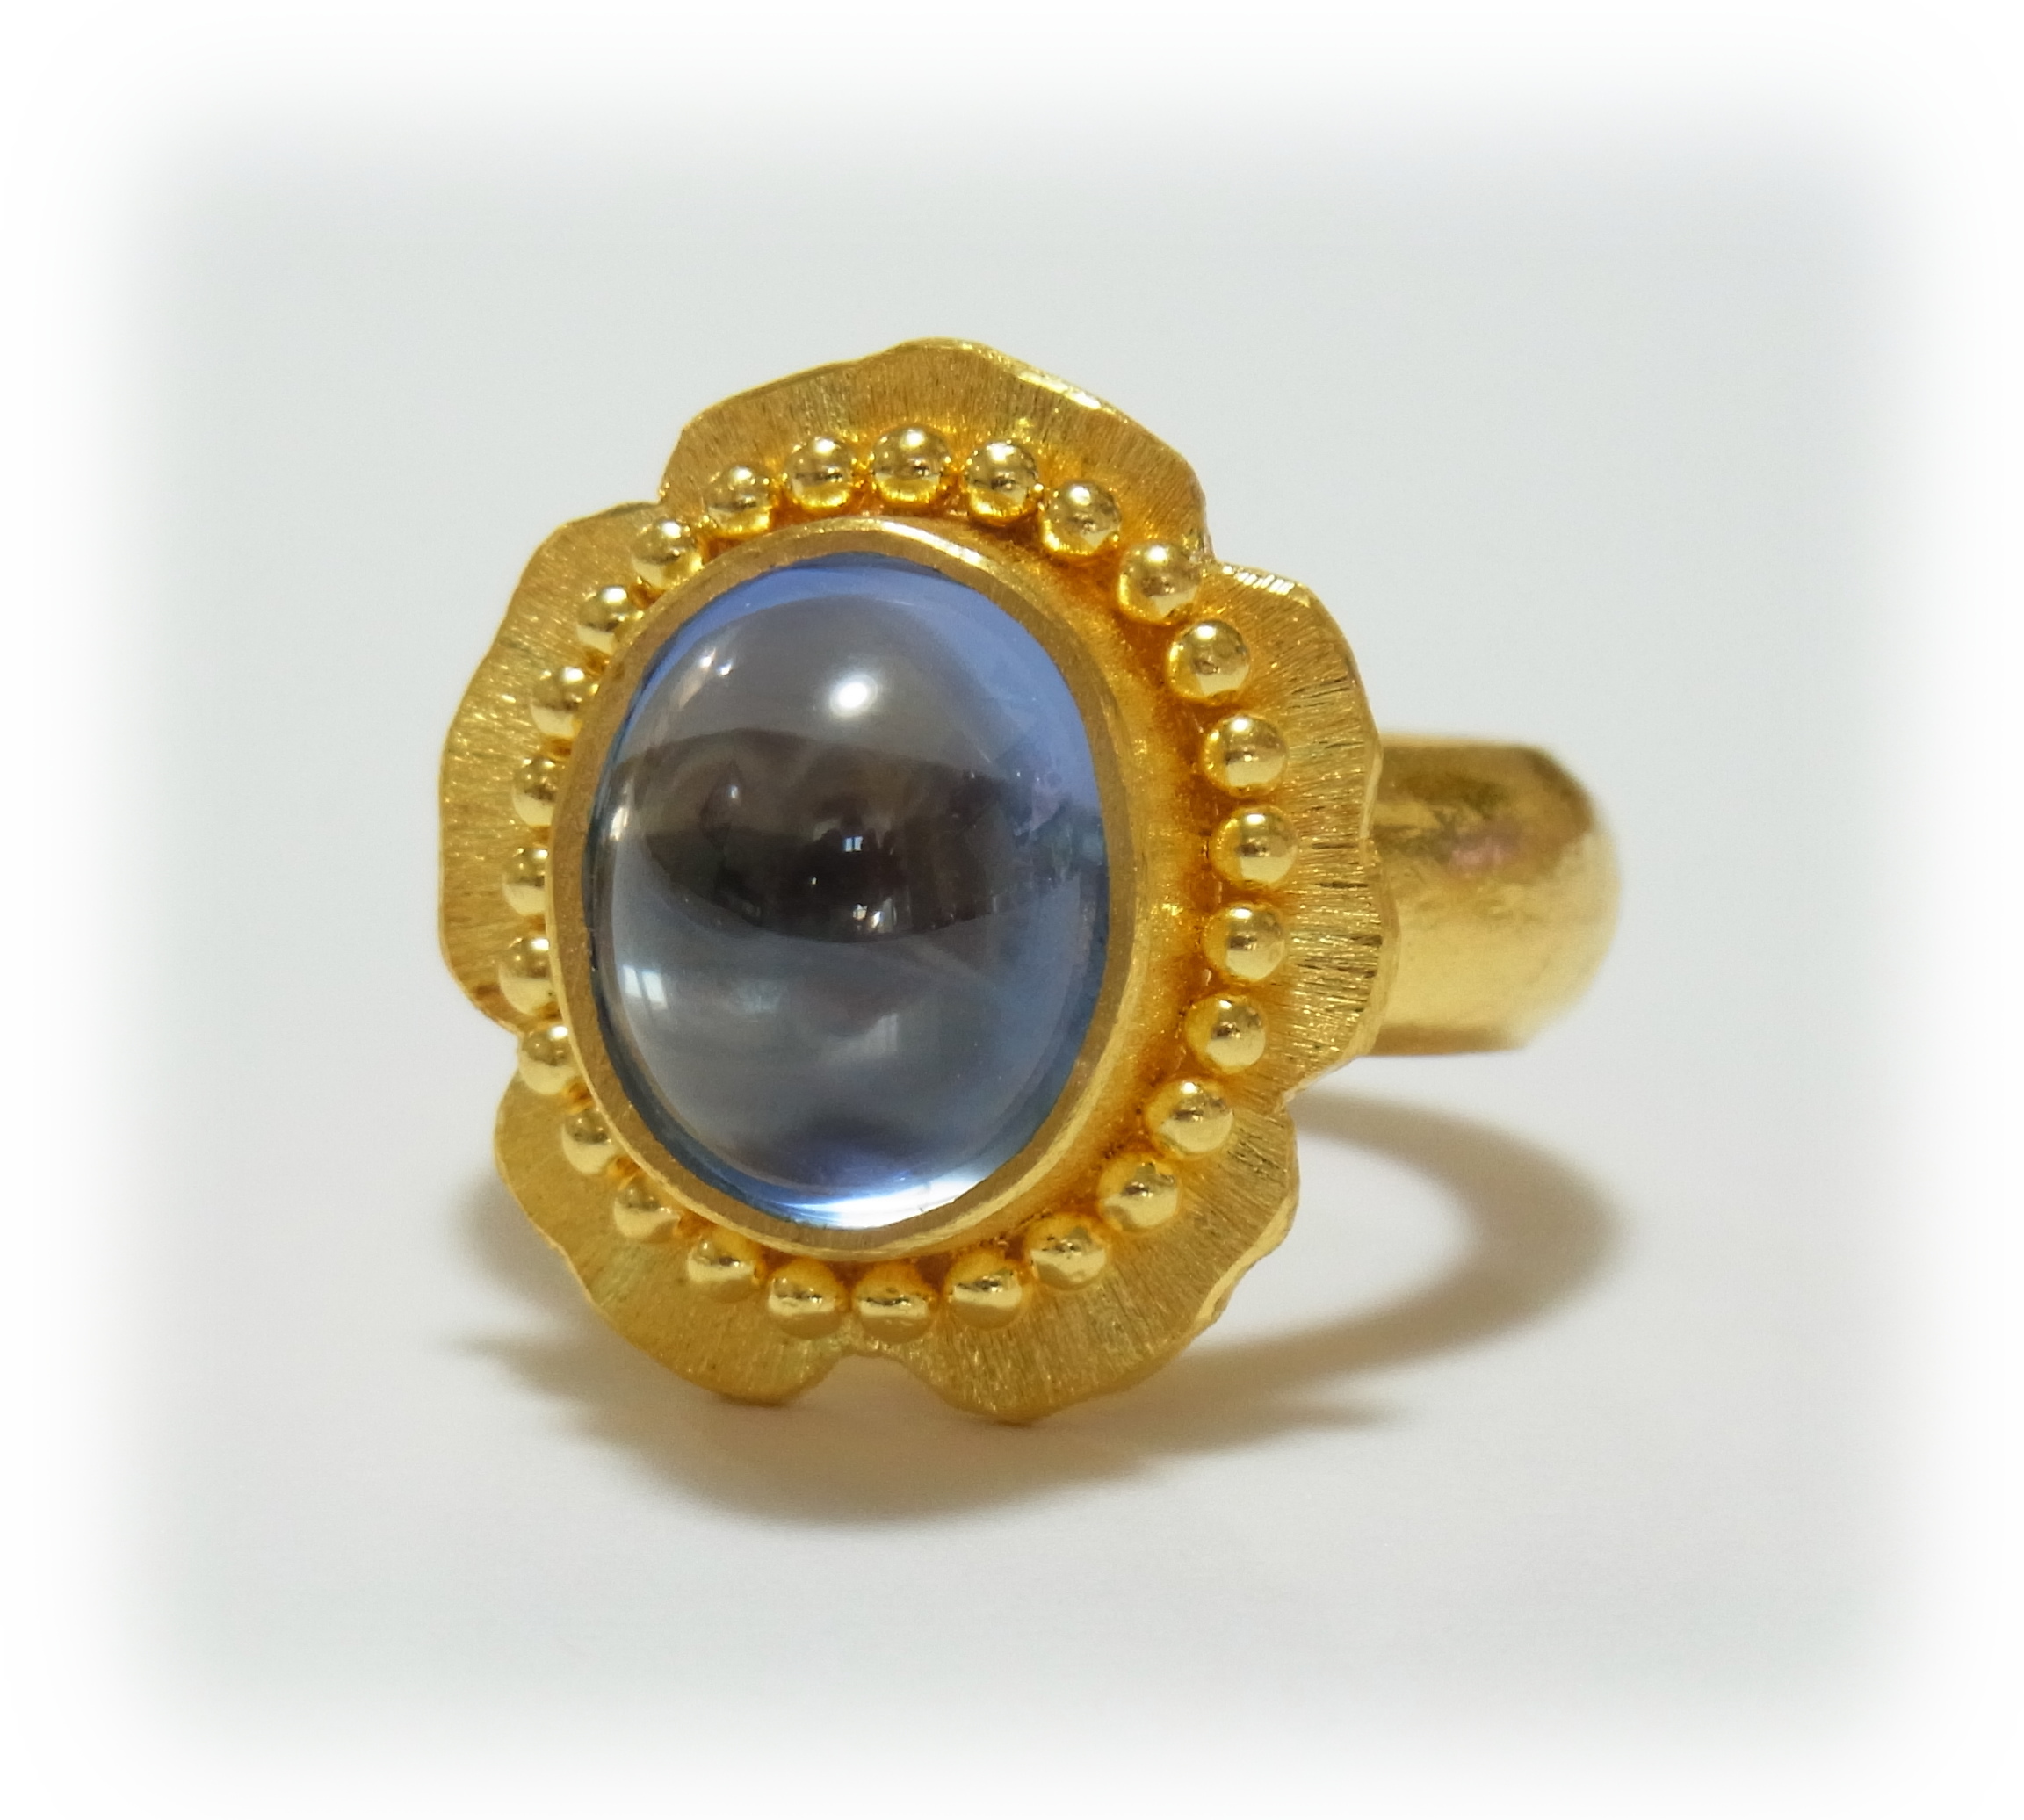 blue sapphire ring with granulation (seen from top)